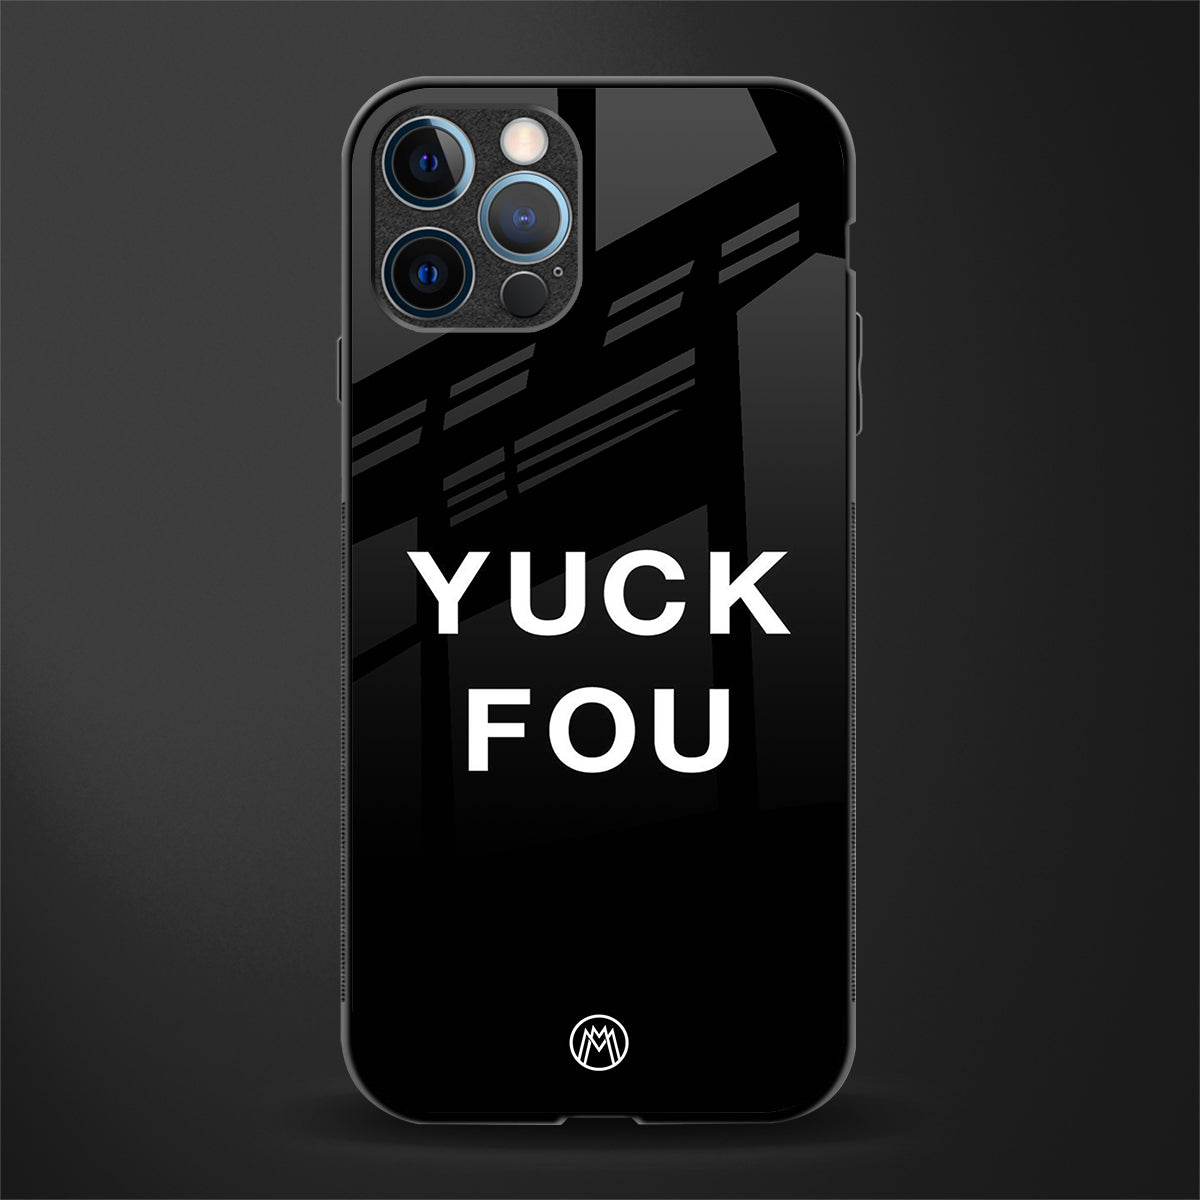 yuck fou glass case for iphone 12 pro max image